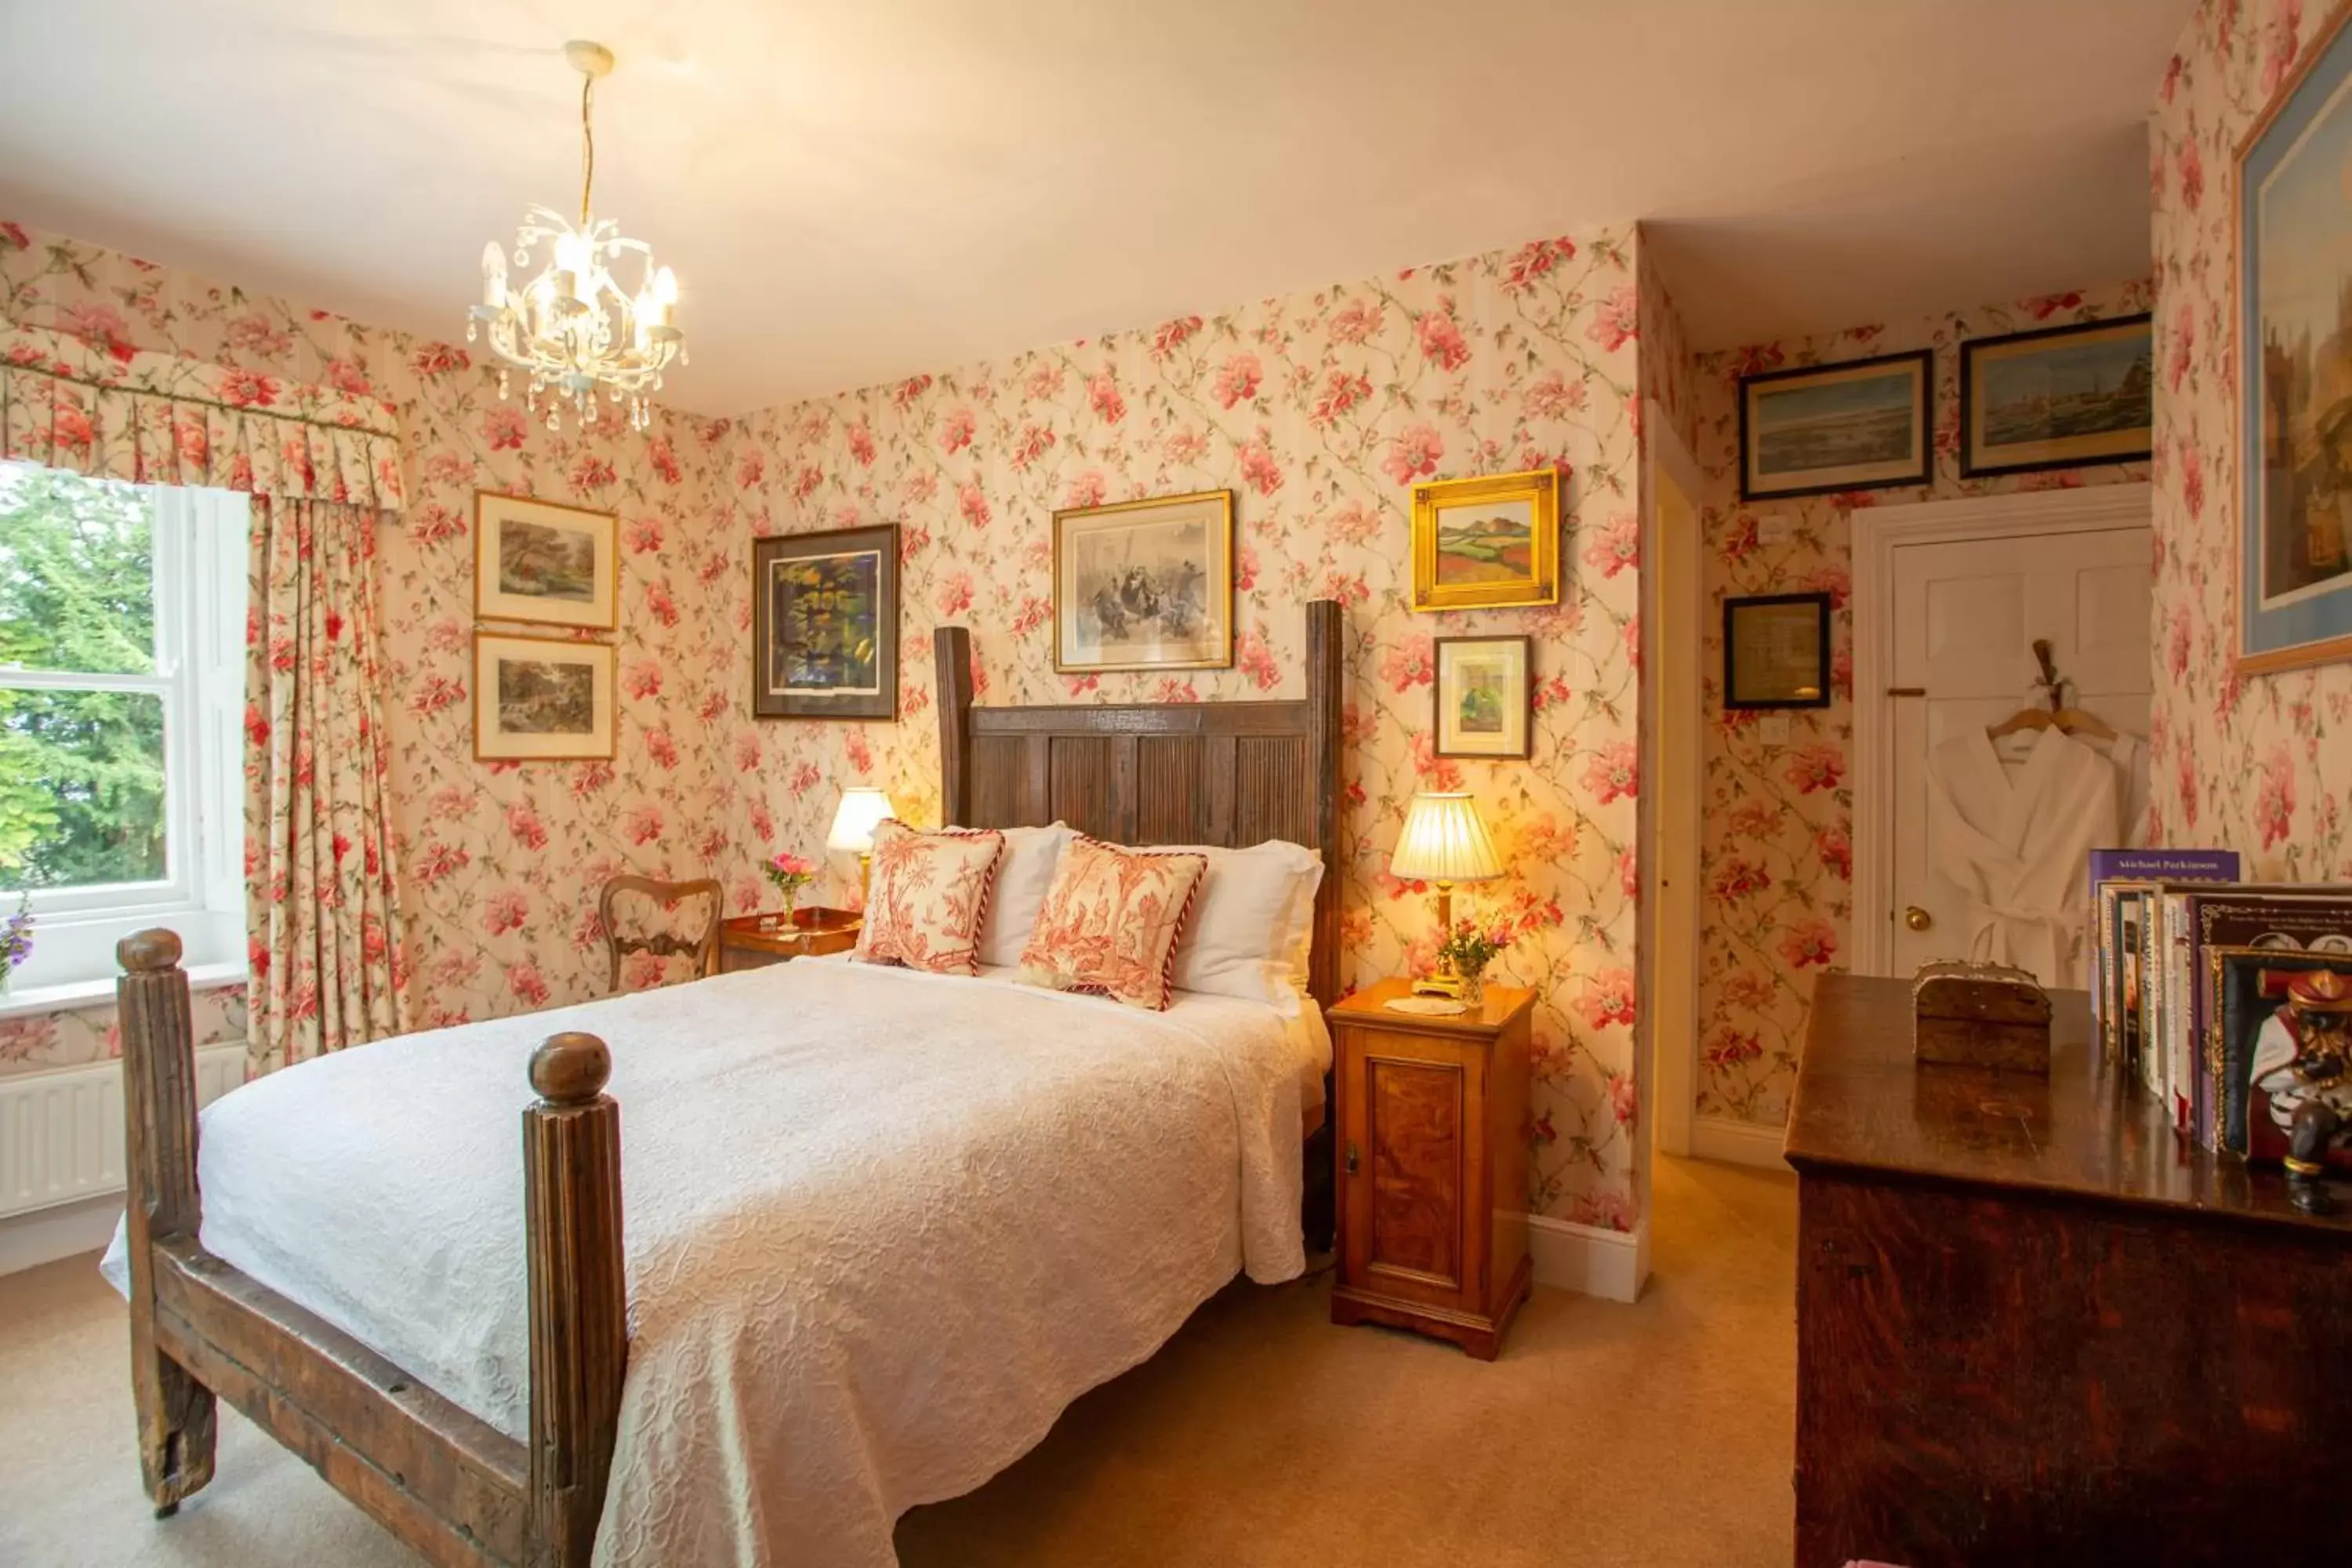 Deluxe Double Room with Bath in Ingram House Bed & Breakfast